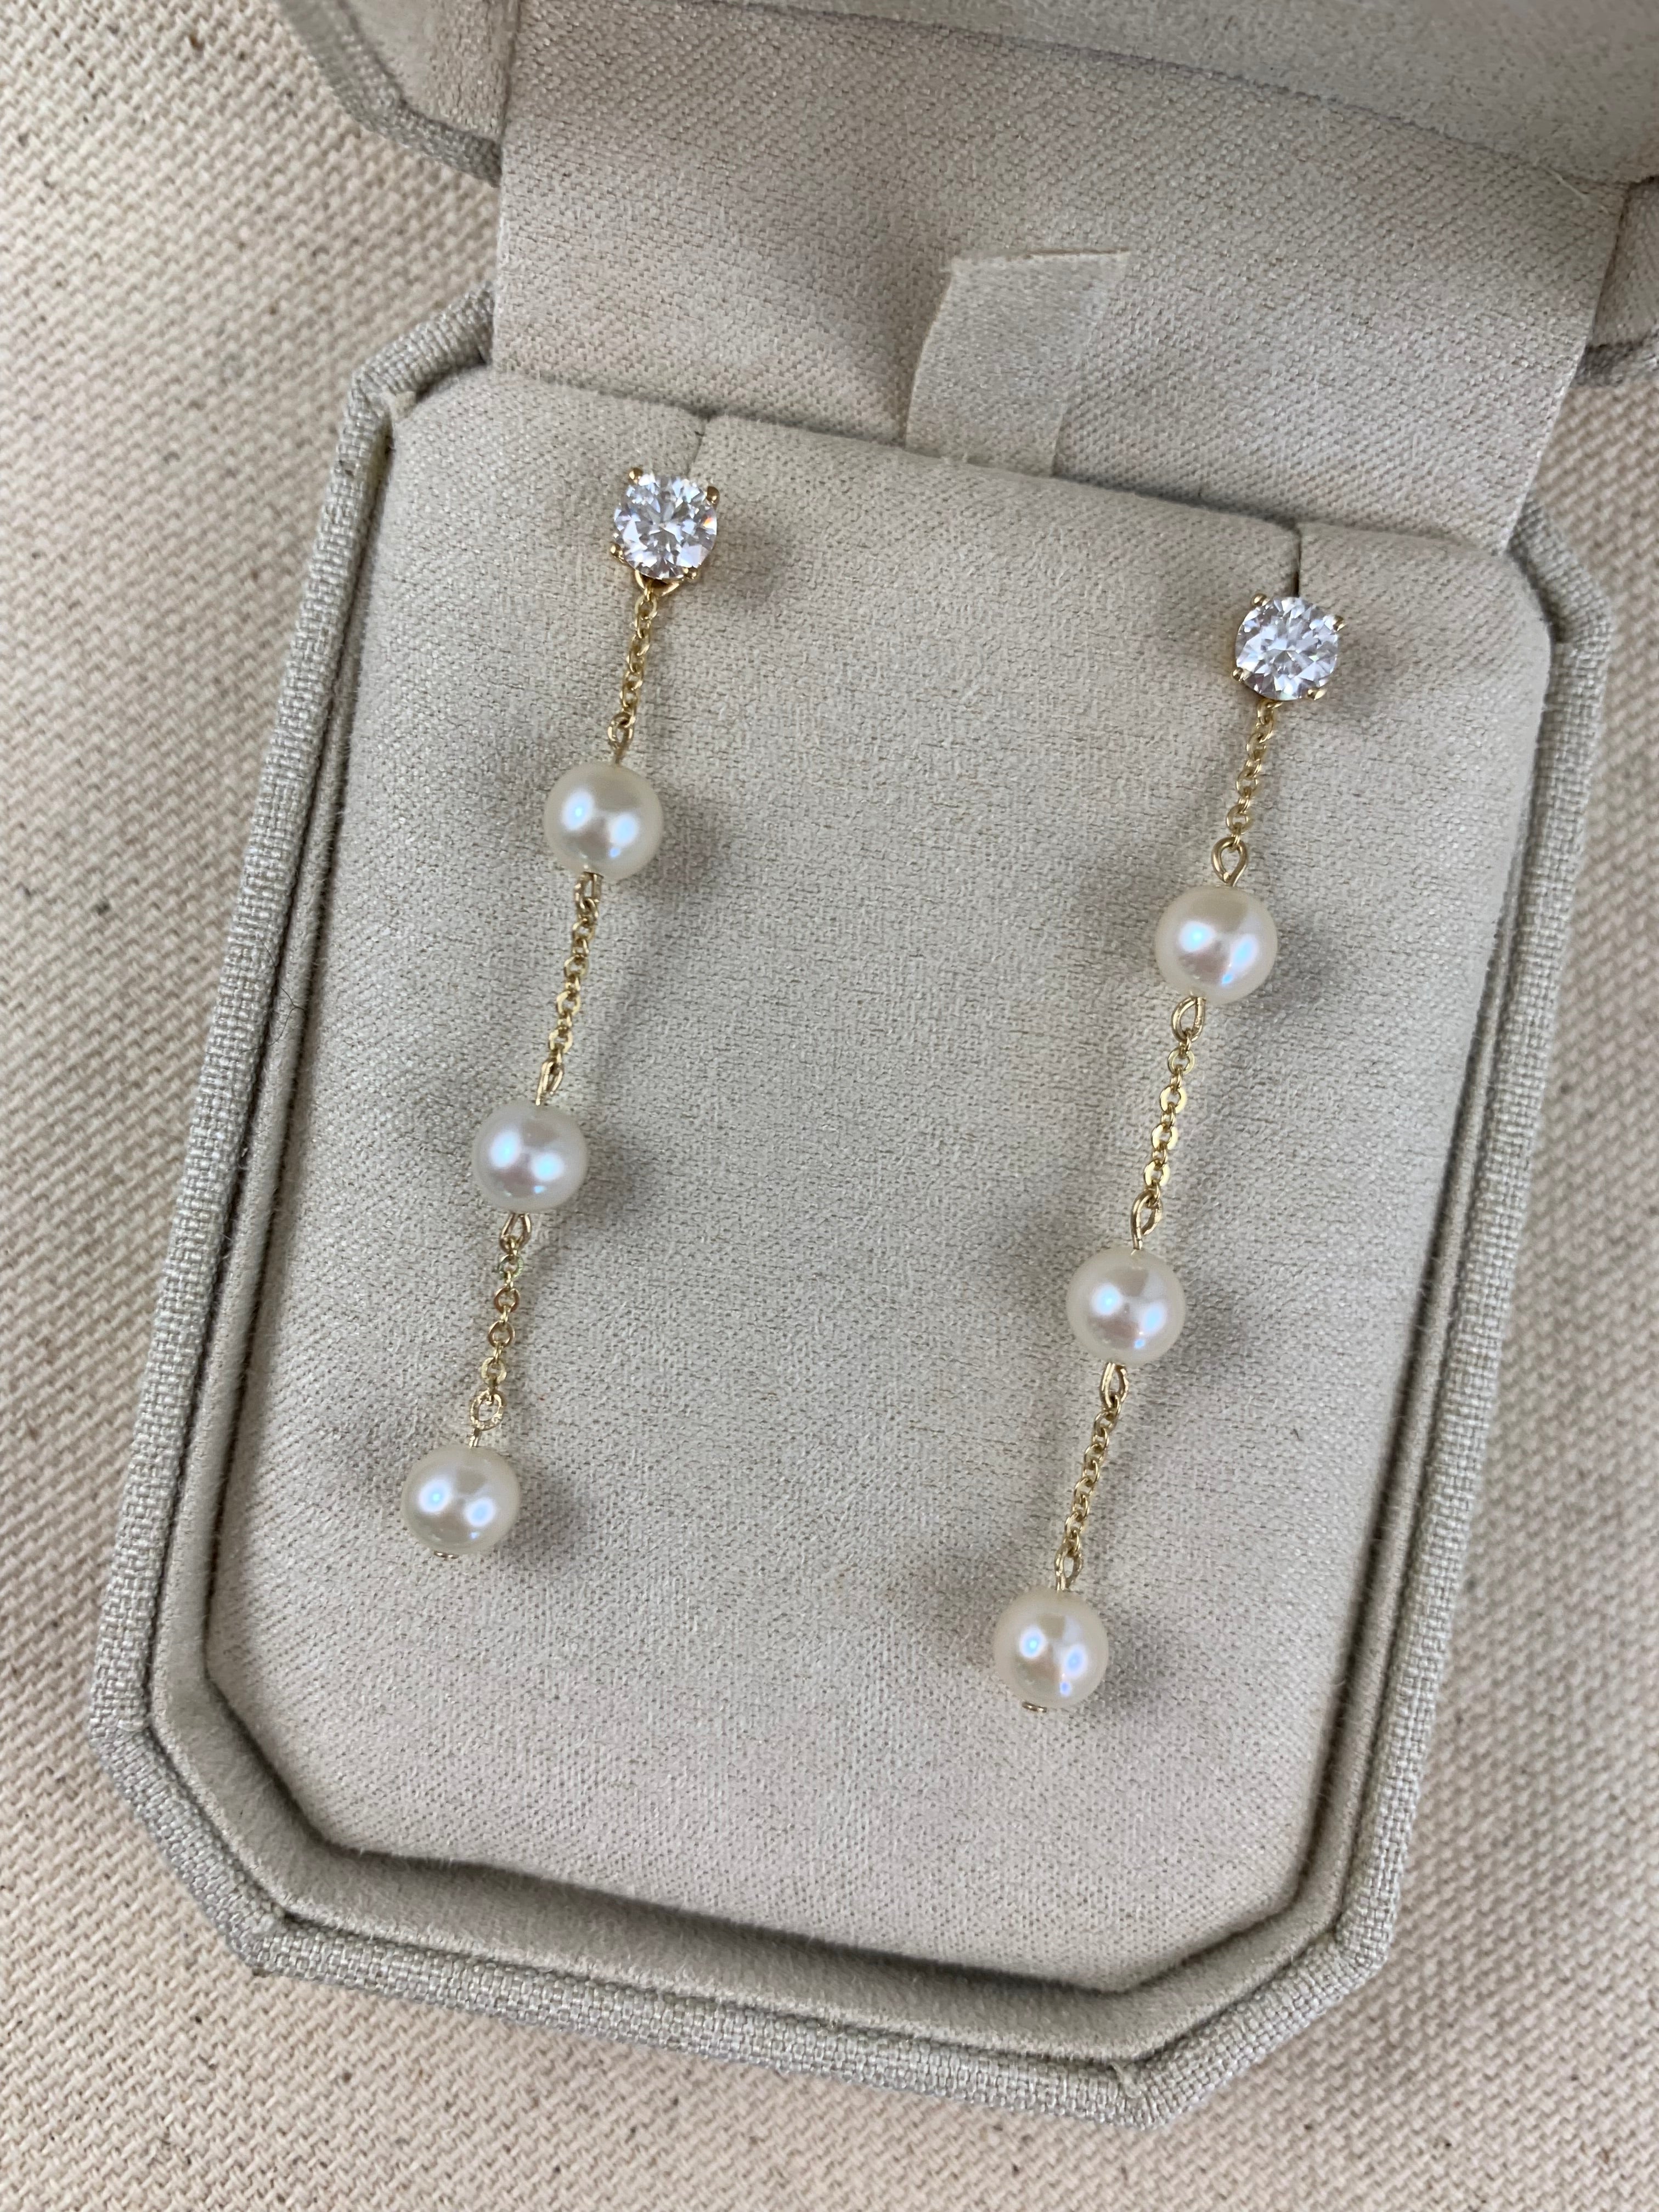 Yellow gold filled pearl dangles